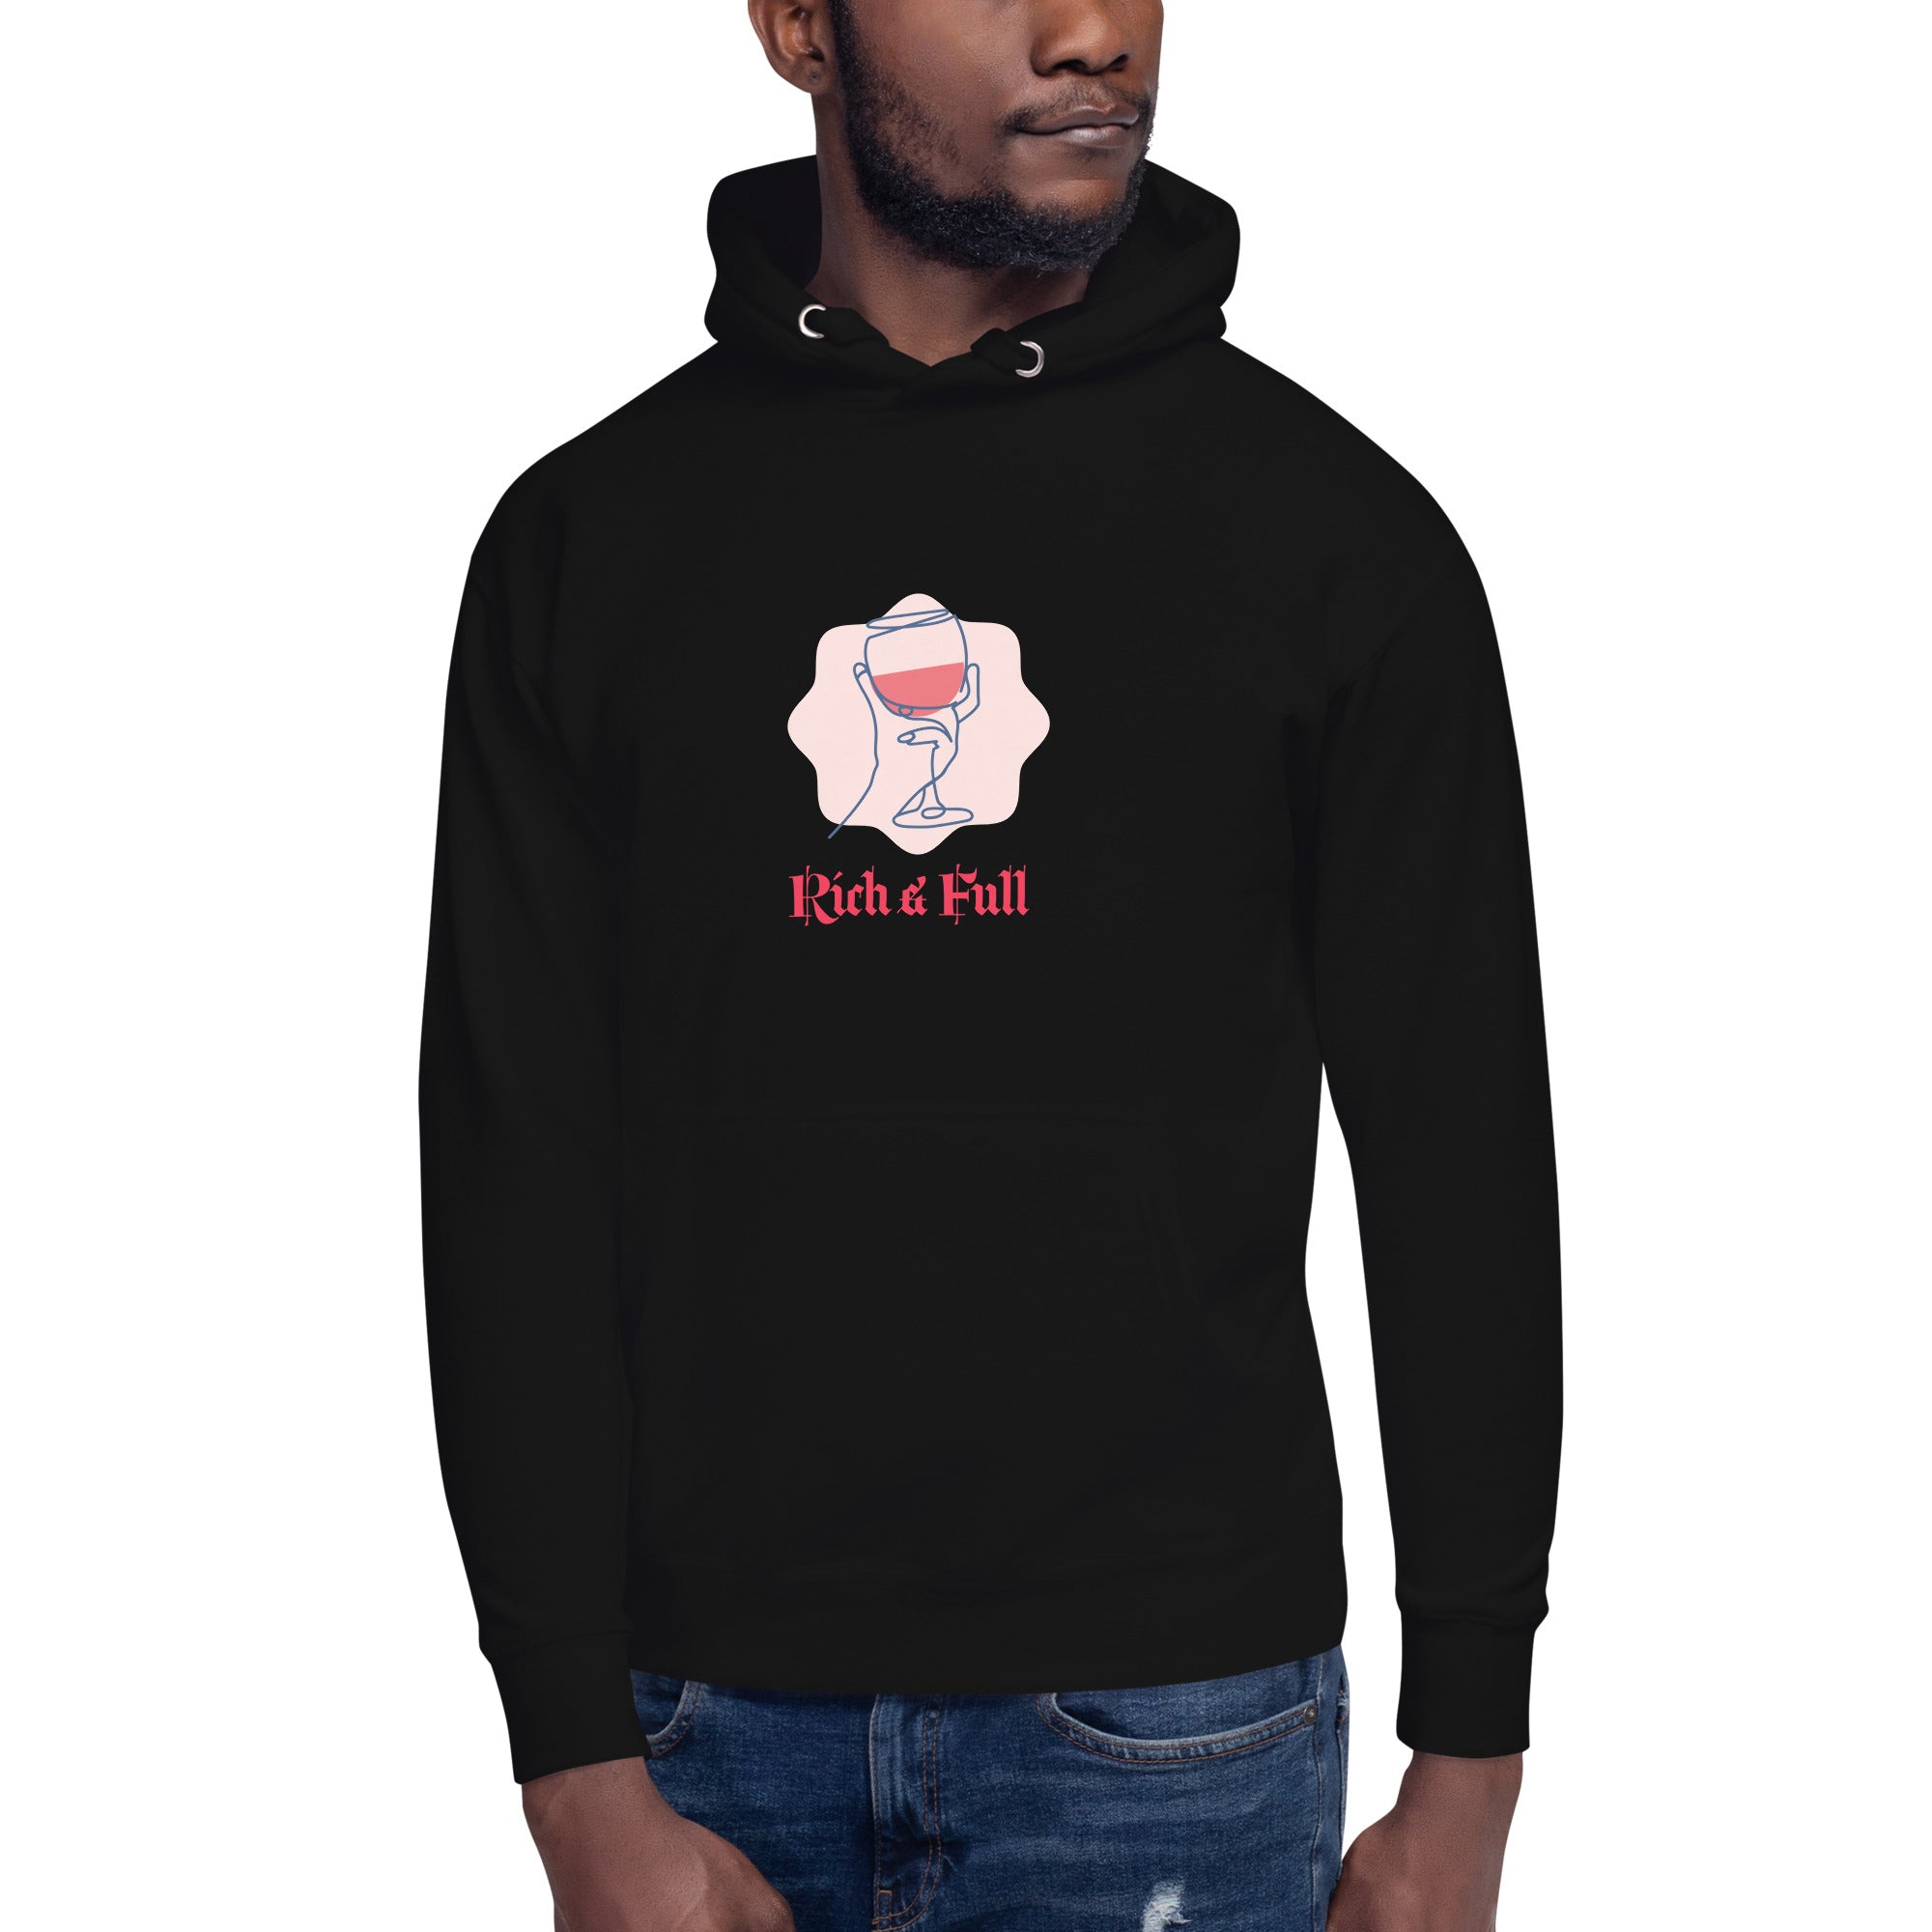 Your Life Rich And Full, Premium Unisex Hoodie | Positive Affirmation Clothing